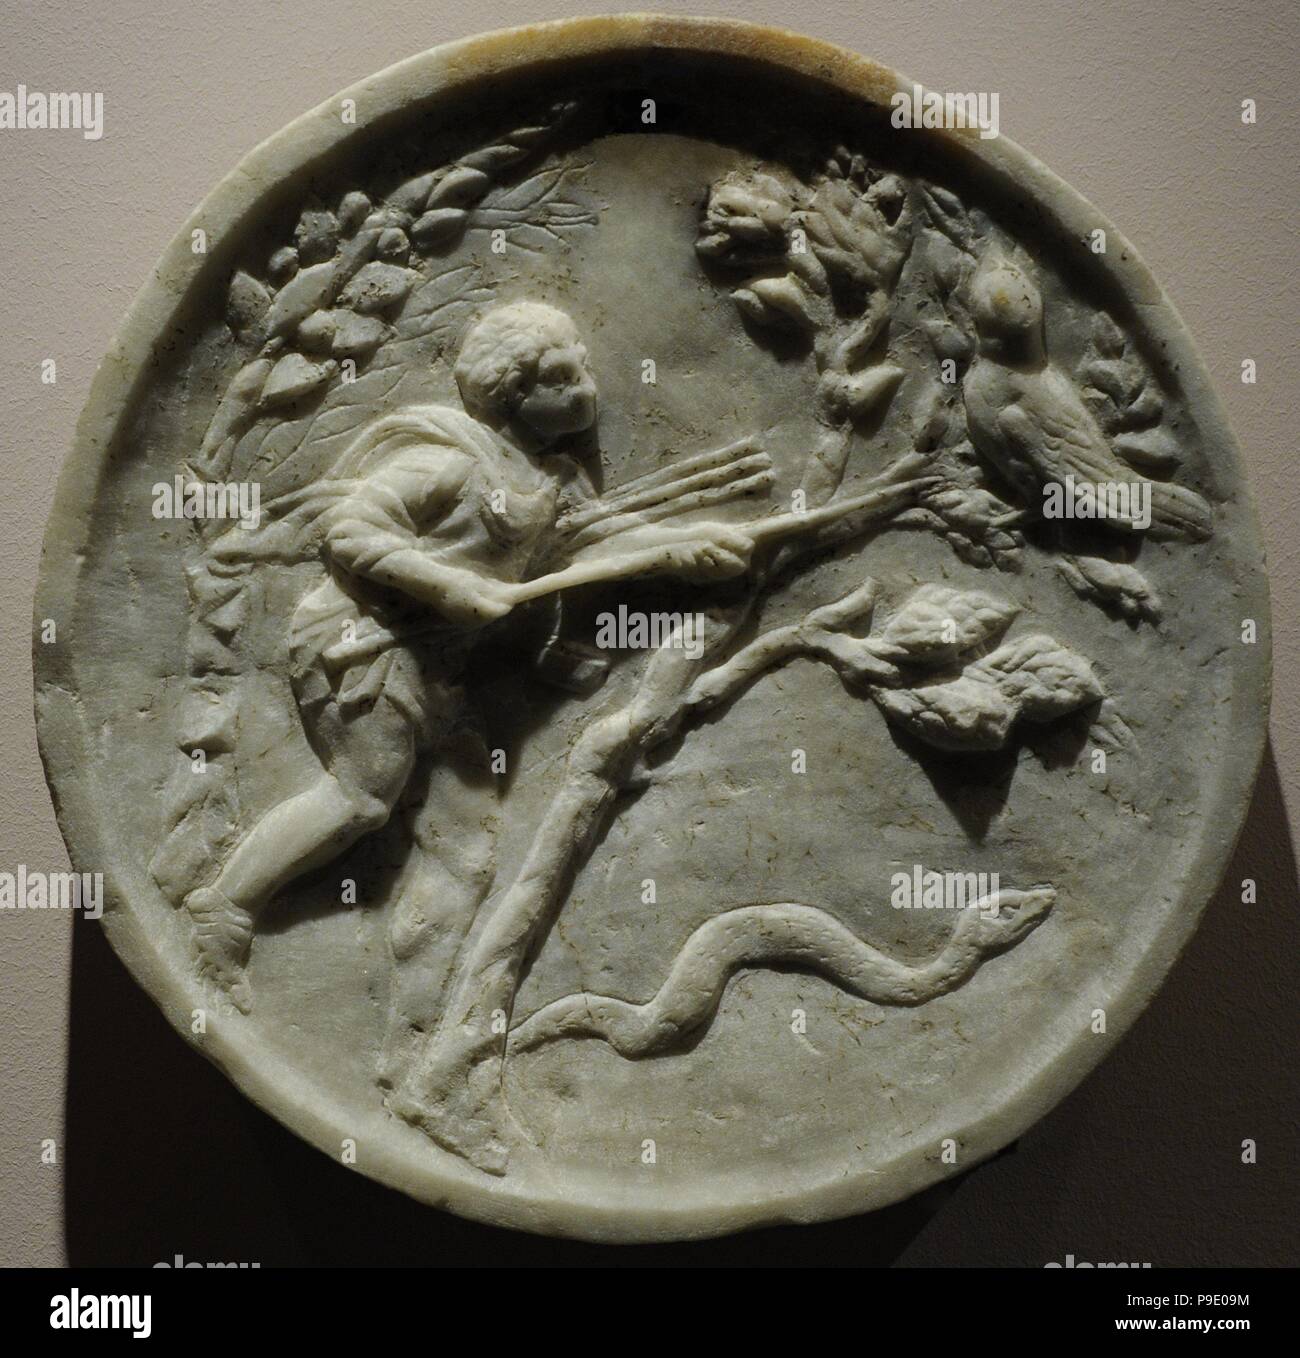 Oscillum with bird-catcher and head of Zeus Ammon in a corolla. Late 1st century BC. From Pompeii, House of Caecilius Iucundus V 1, 23-26. Marble. National Archeological Museum. Naples. Italy. Stock Photo